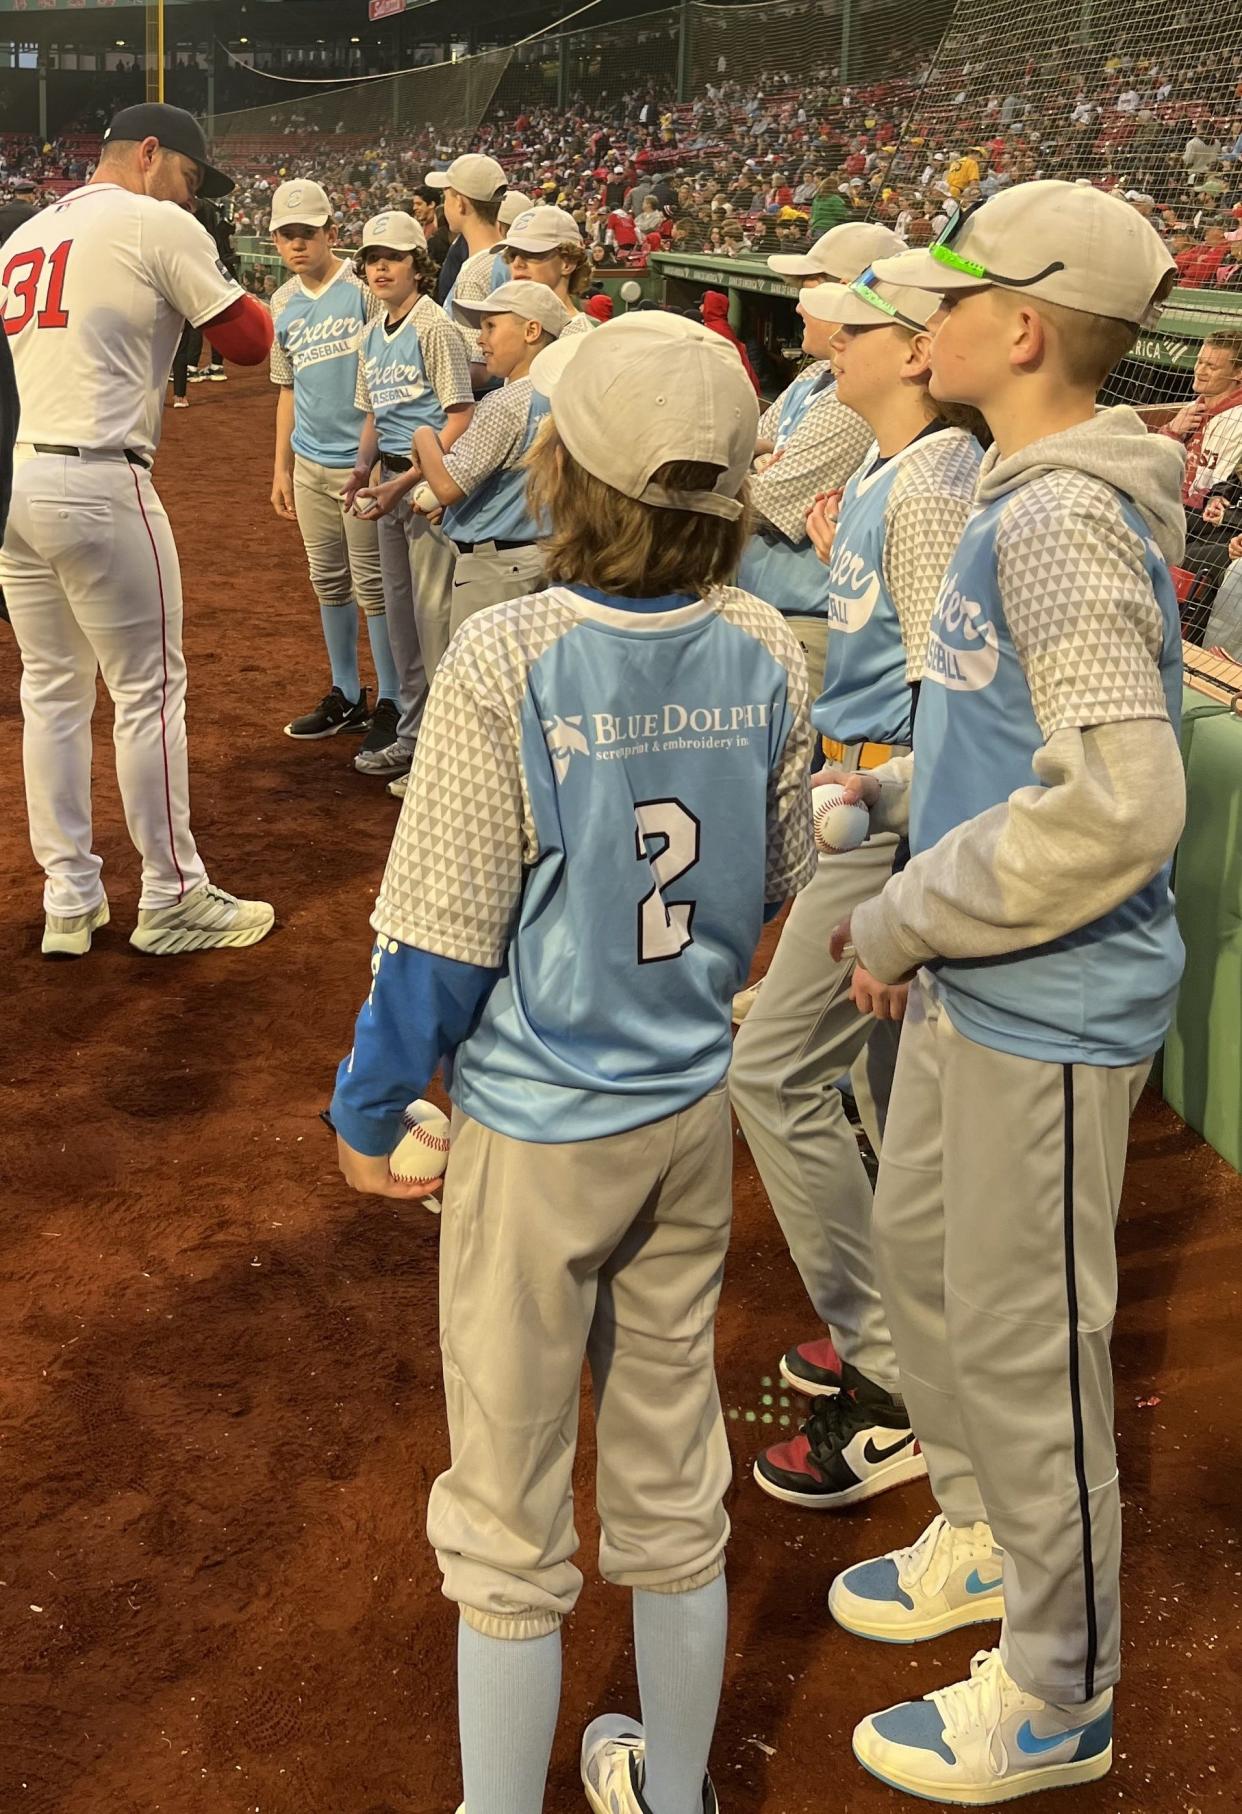 The Exeter Cal Ripken team of 12-and-under baseball players made an appearance on the field at Fenway Park in Boston, shaking hands with Red Sox players, Wednesday, April 17, 2024.